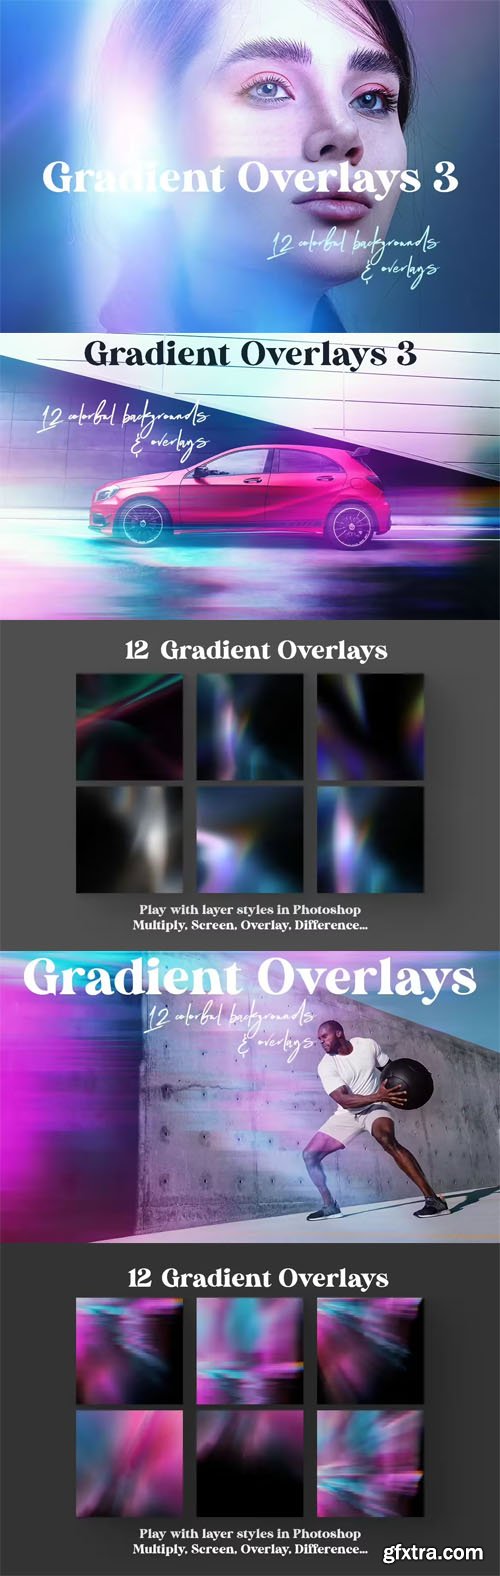 Gradient Overlays Vol.3 - 12 Colorful Backgrounds